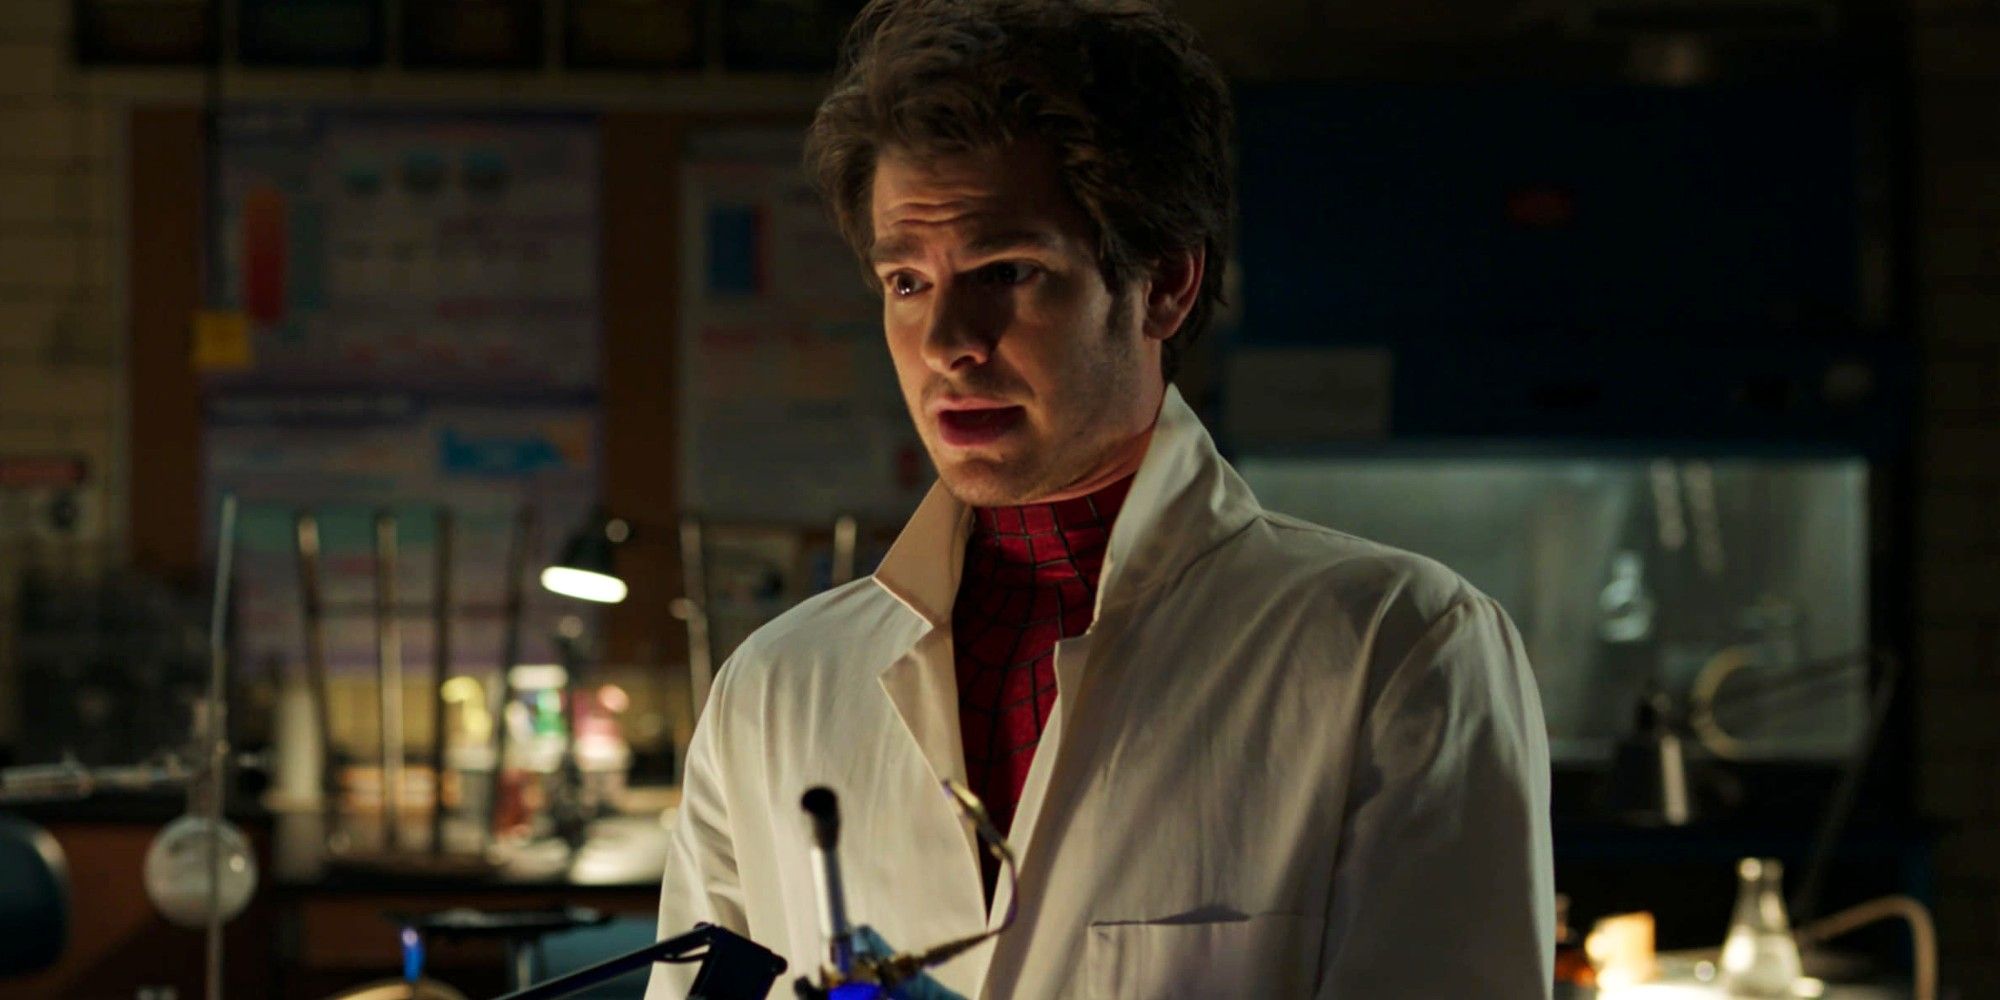 Andrew Garfield as Peter Parker in Spider-Man No Way Home wearing a lab coat over his suit